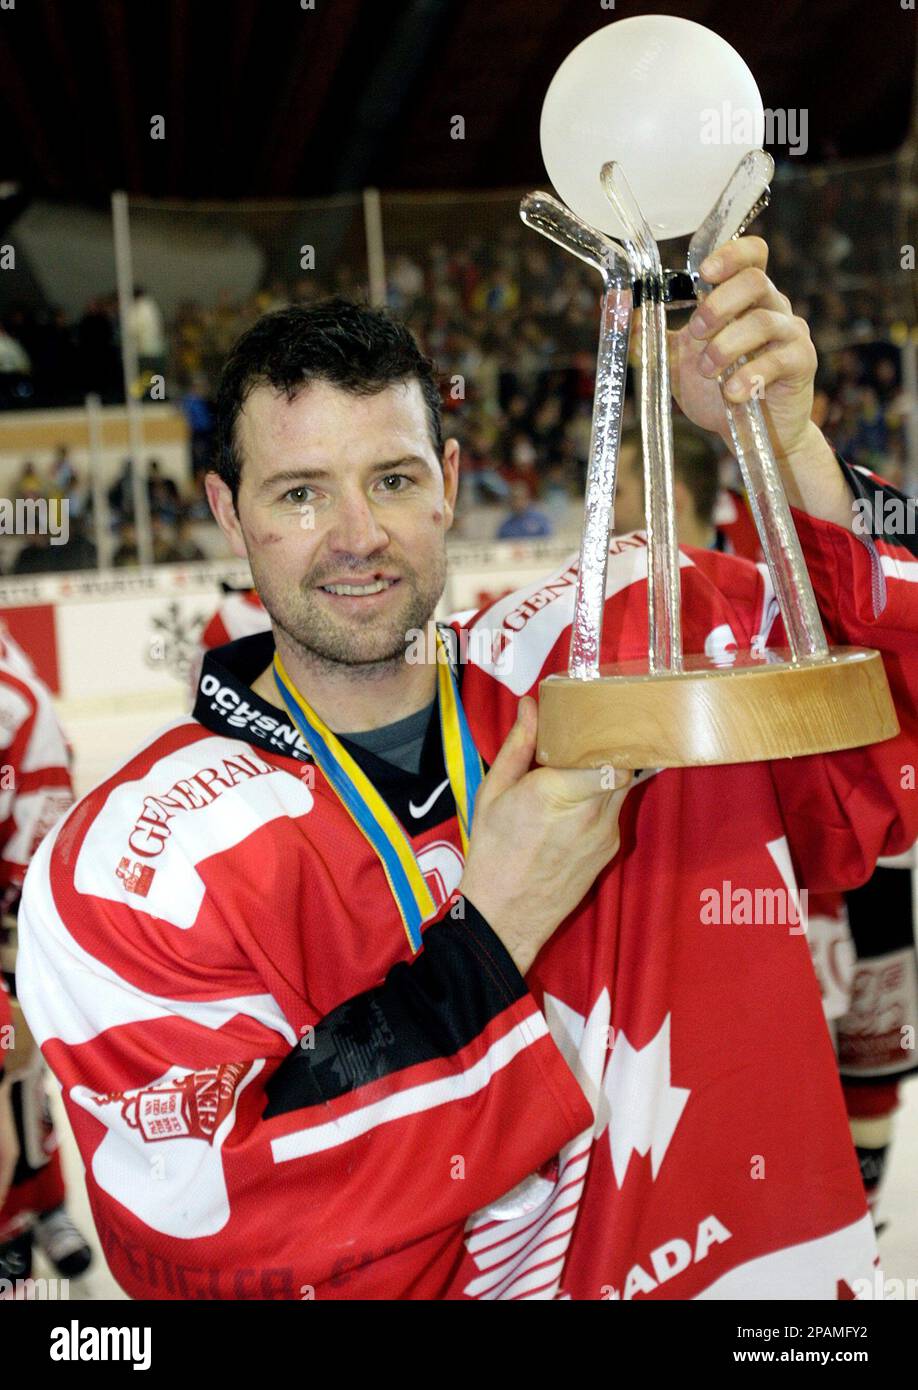 Team Canadas player Serge Aubin presents the winners trophy of the Spengler Cup after Canada won the final game between Team Canada and Salavat Yulaev Ufa, Russia, at the 81th Spengler Cup